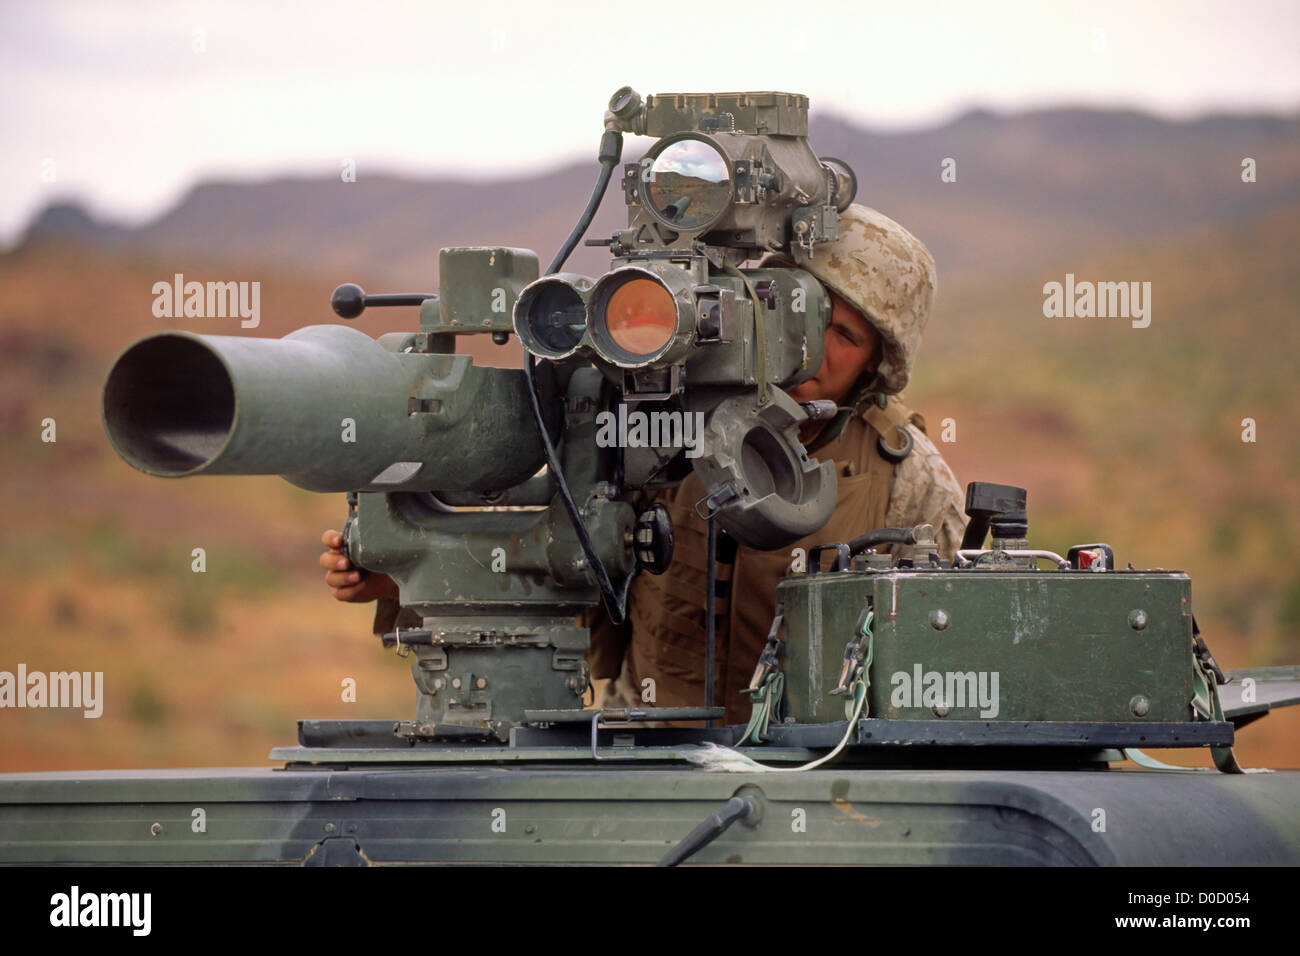 A US Marine Prepares to Fire a TOW Missile During a Training Exercise Stock Photo